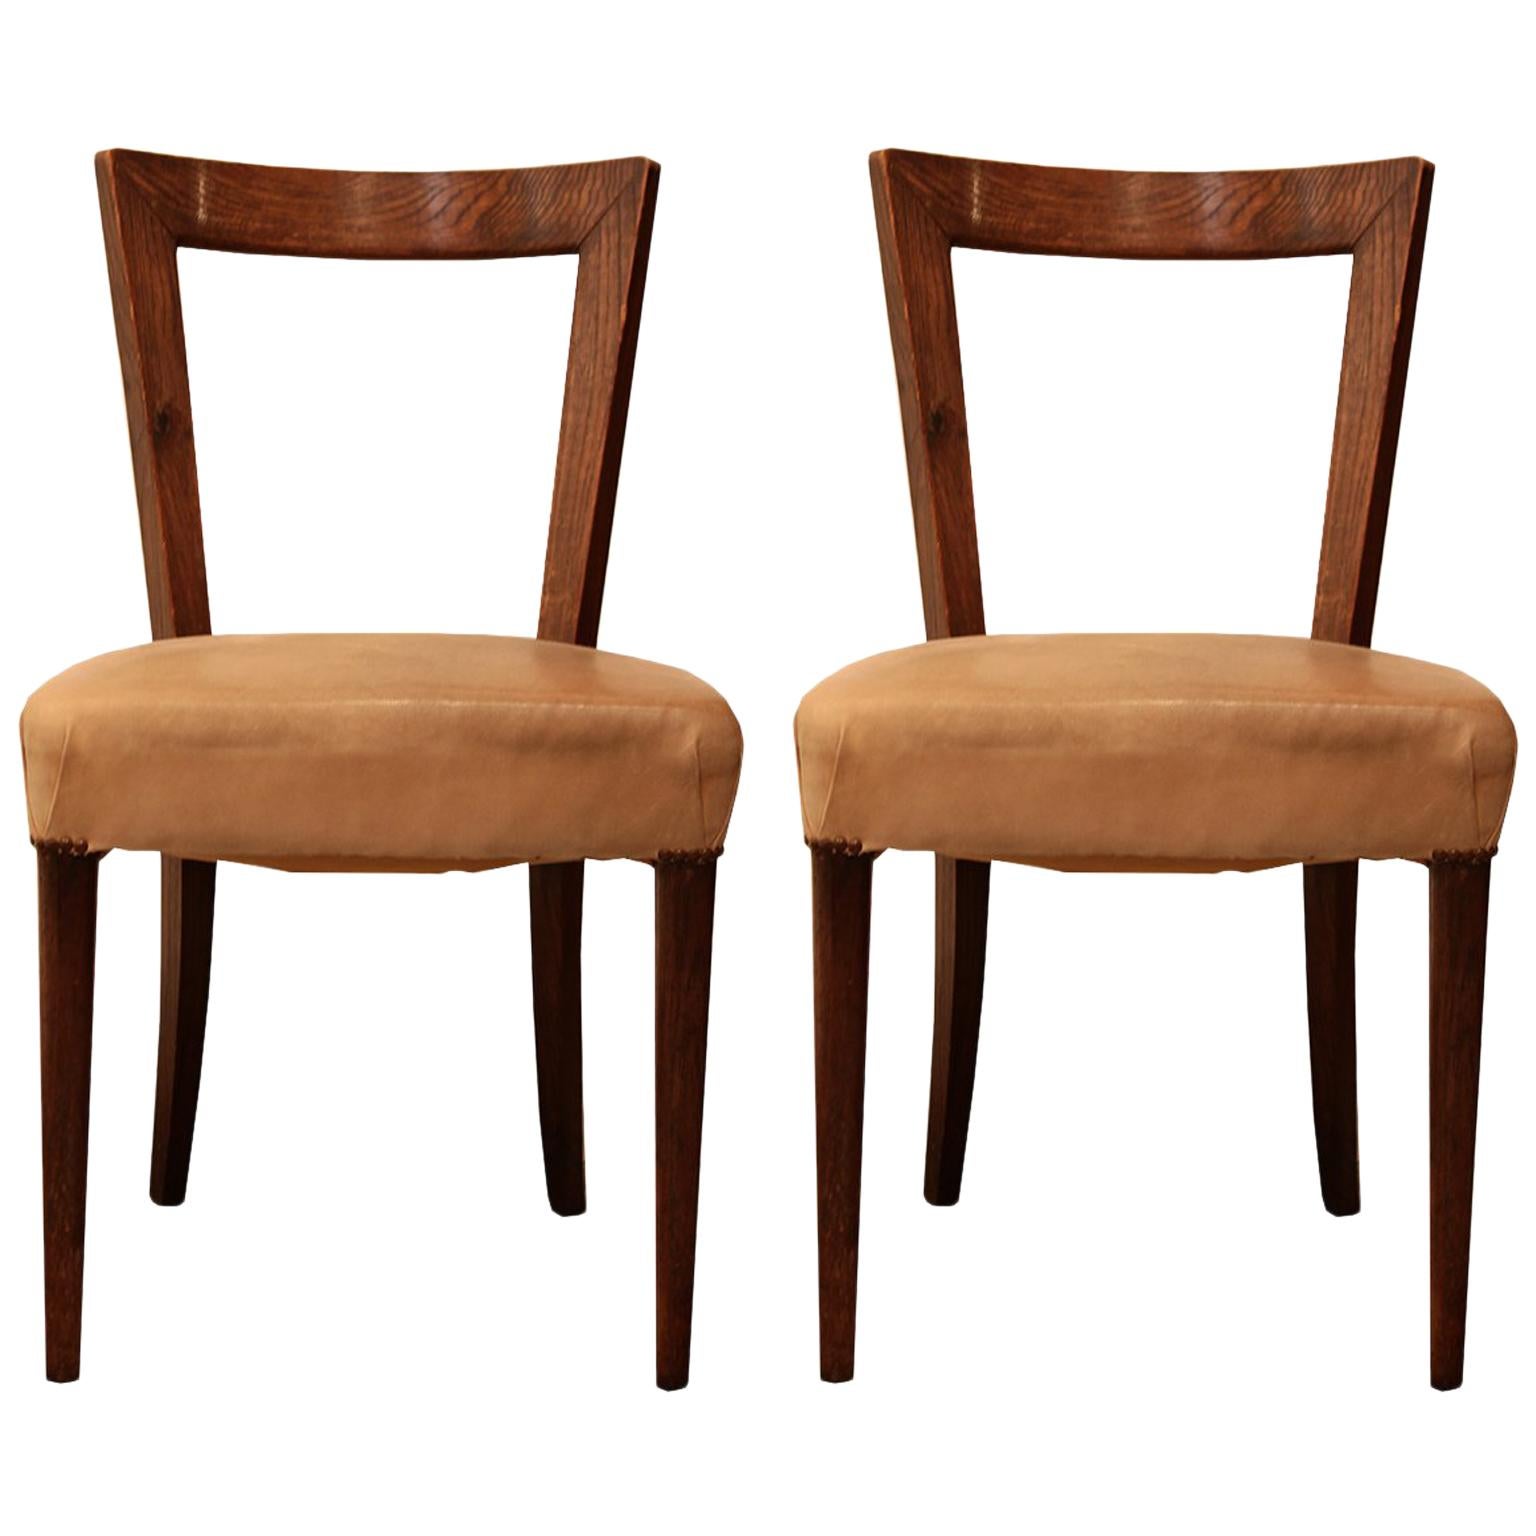 Pair of Modernist Chairs in Oak Wood for Oda Gadda House For Sale